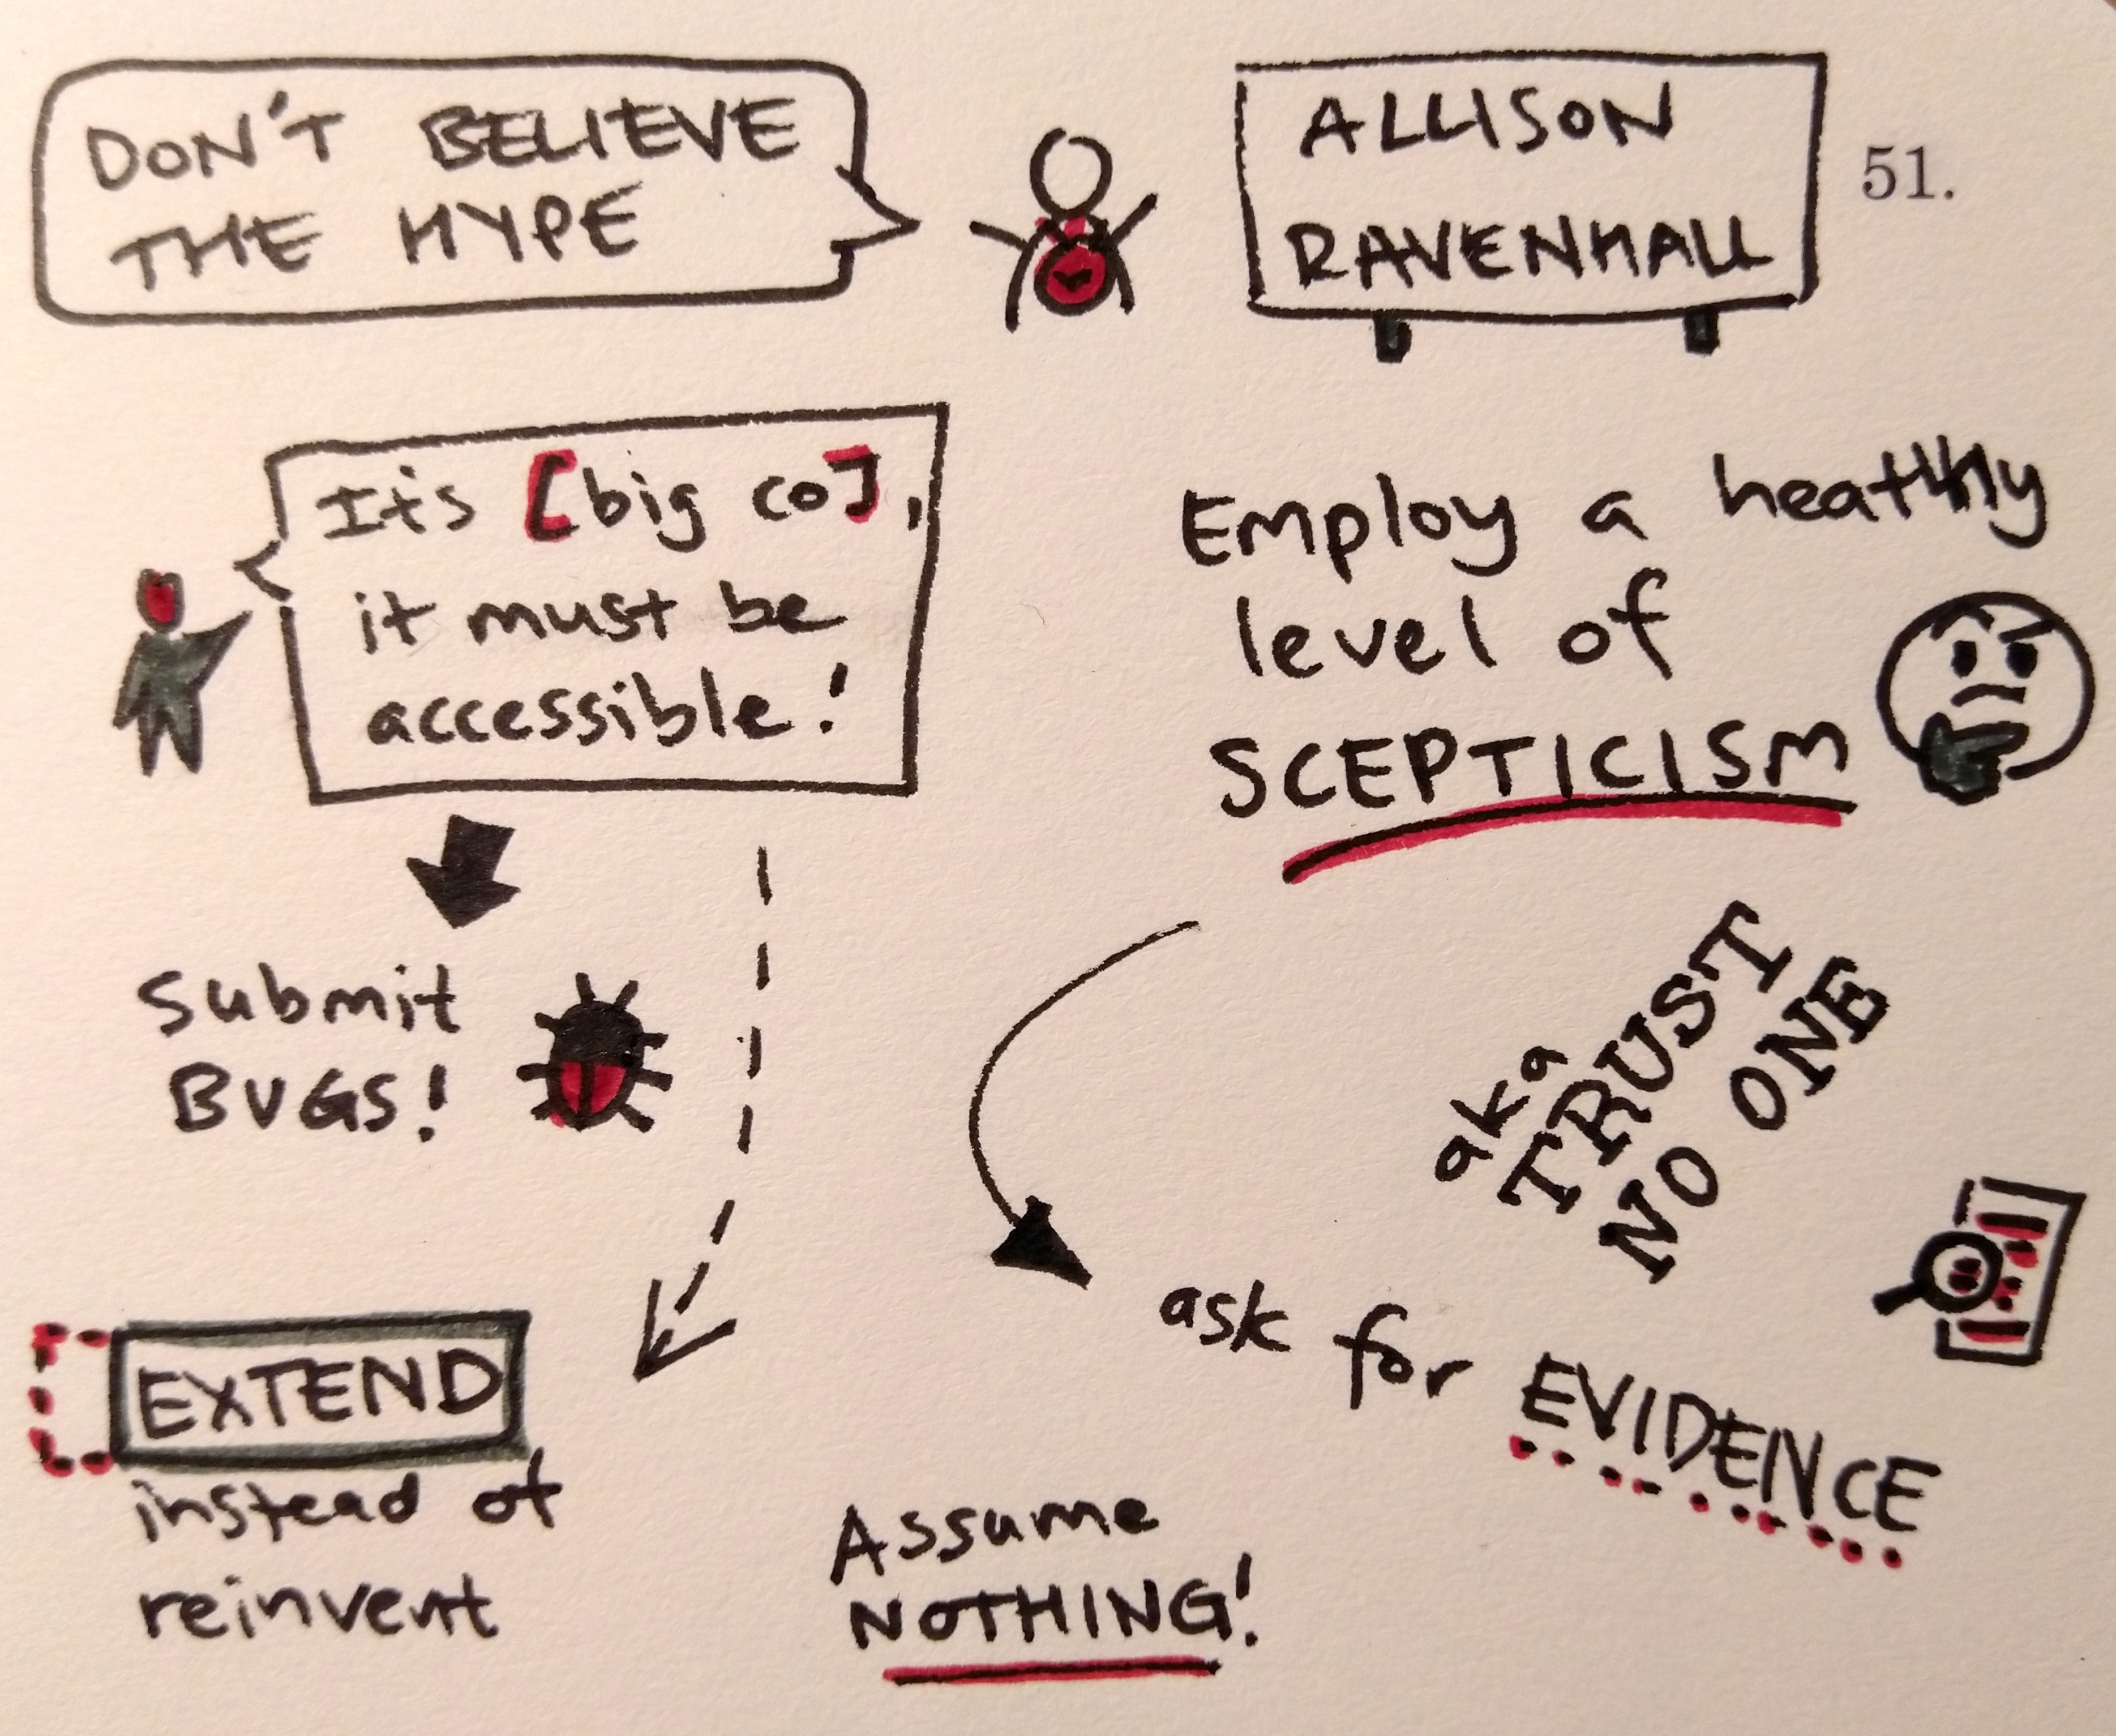 Sketchnotes for Allison Ravenhall - Don't believe the hype